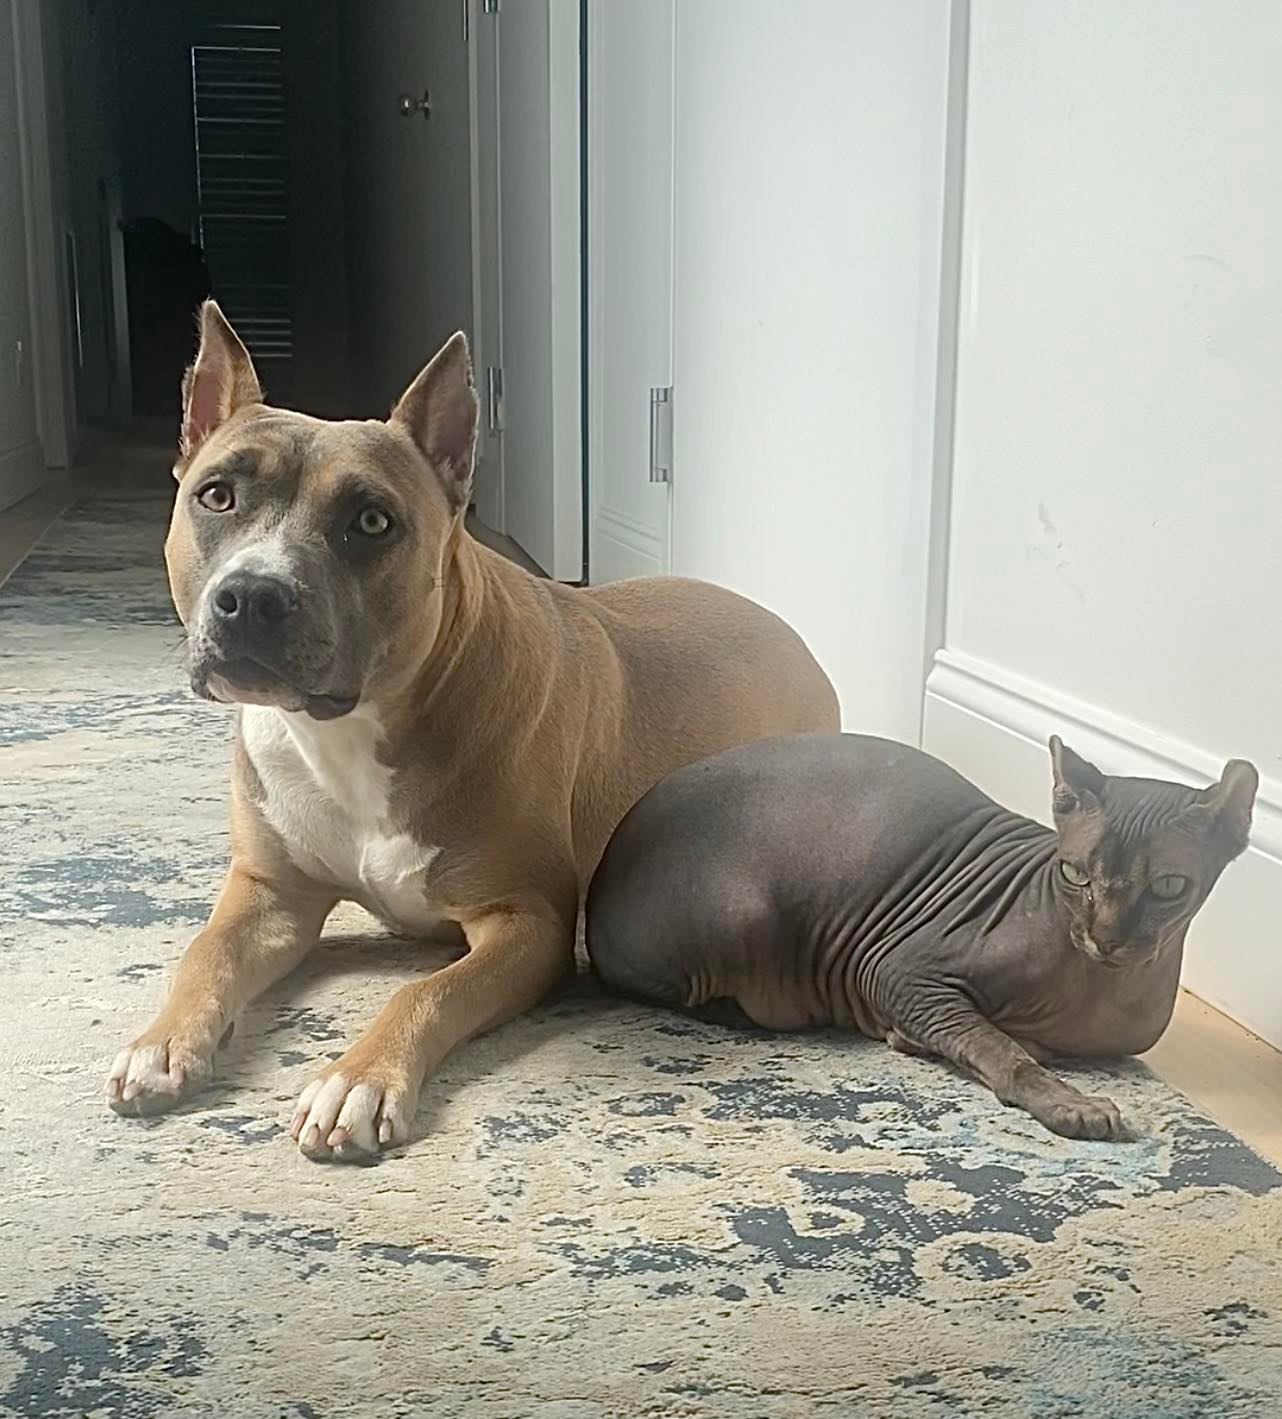 Can pit bulls live with cats?